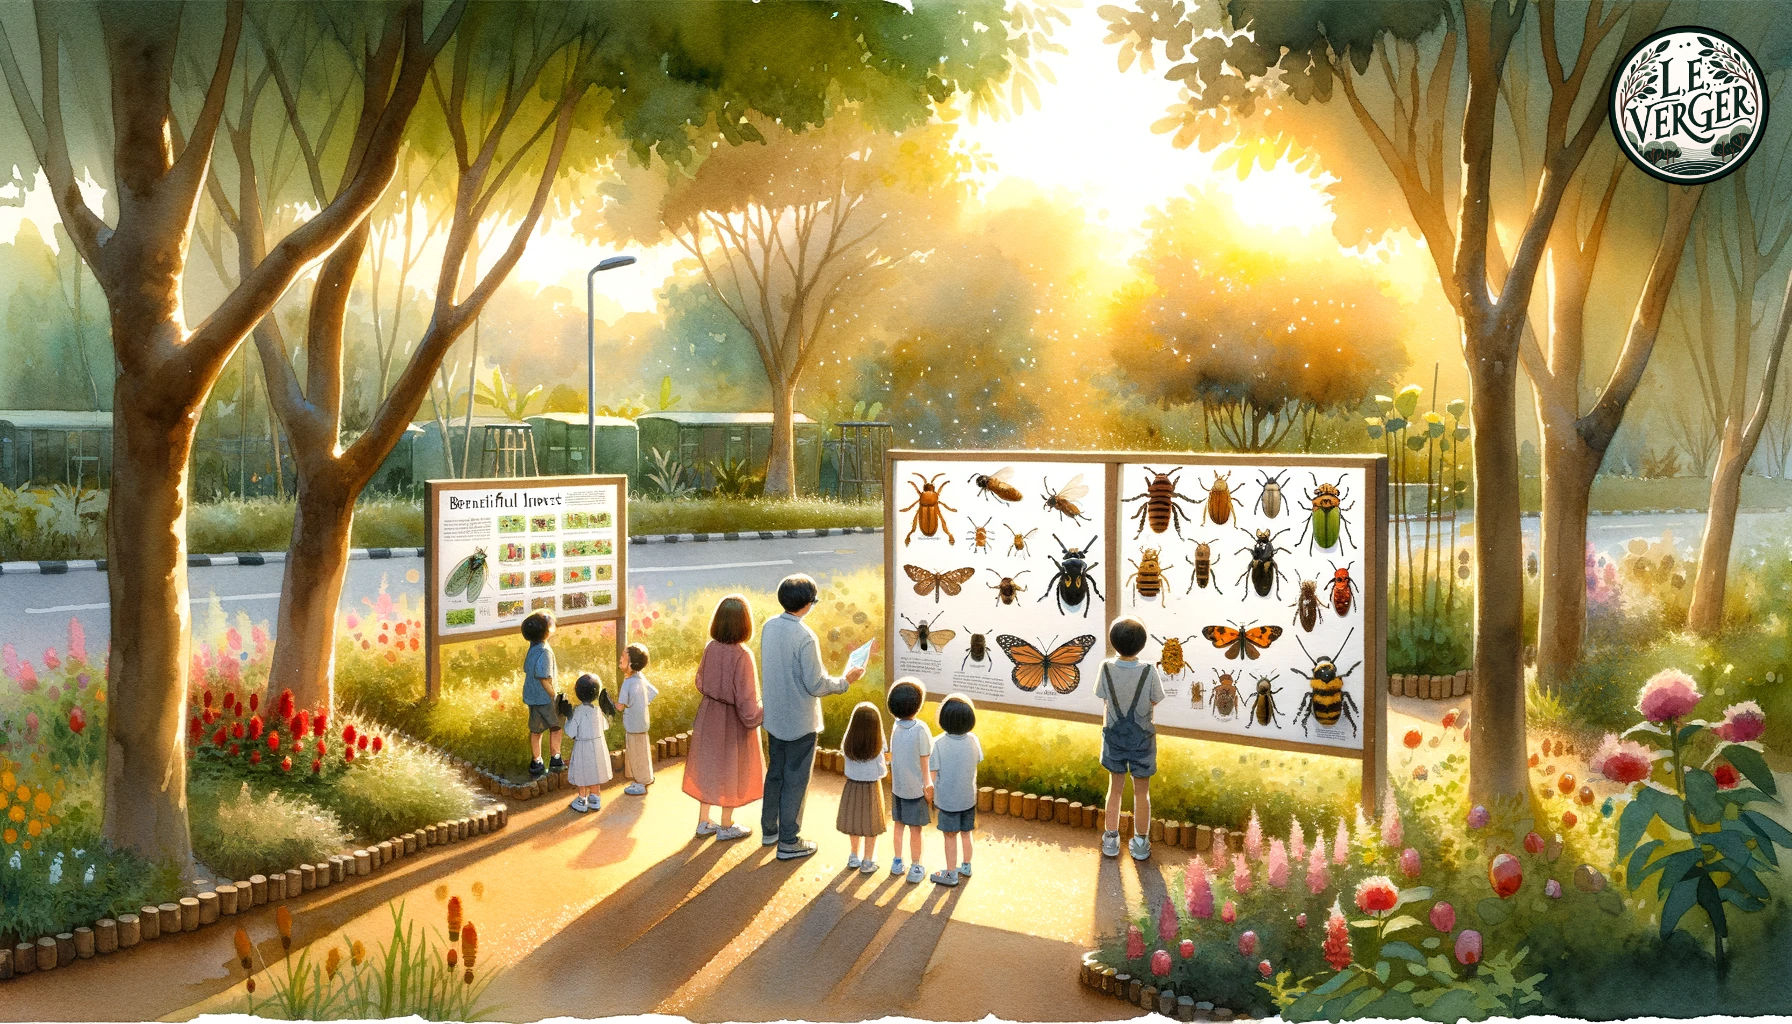 Watercolour Painting: A serene garden setting during golden hour. Children and adults marvel at the sight of various beneficial insects in the garden. In the background, there are educational boards explaining the importance of each insect in maintaining a healthy ecosystem.